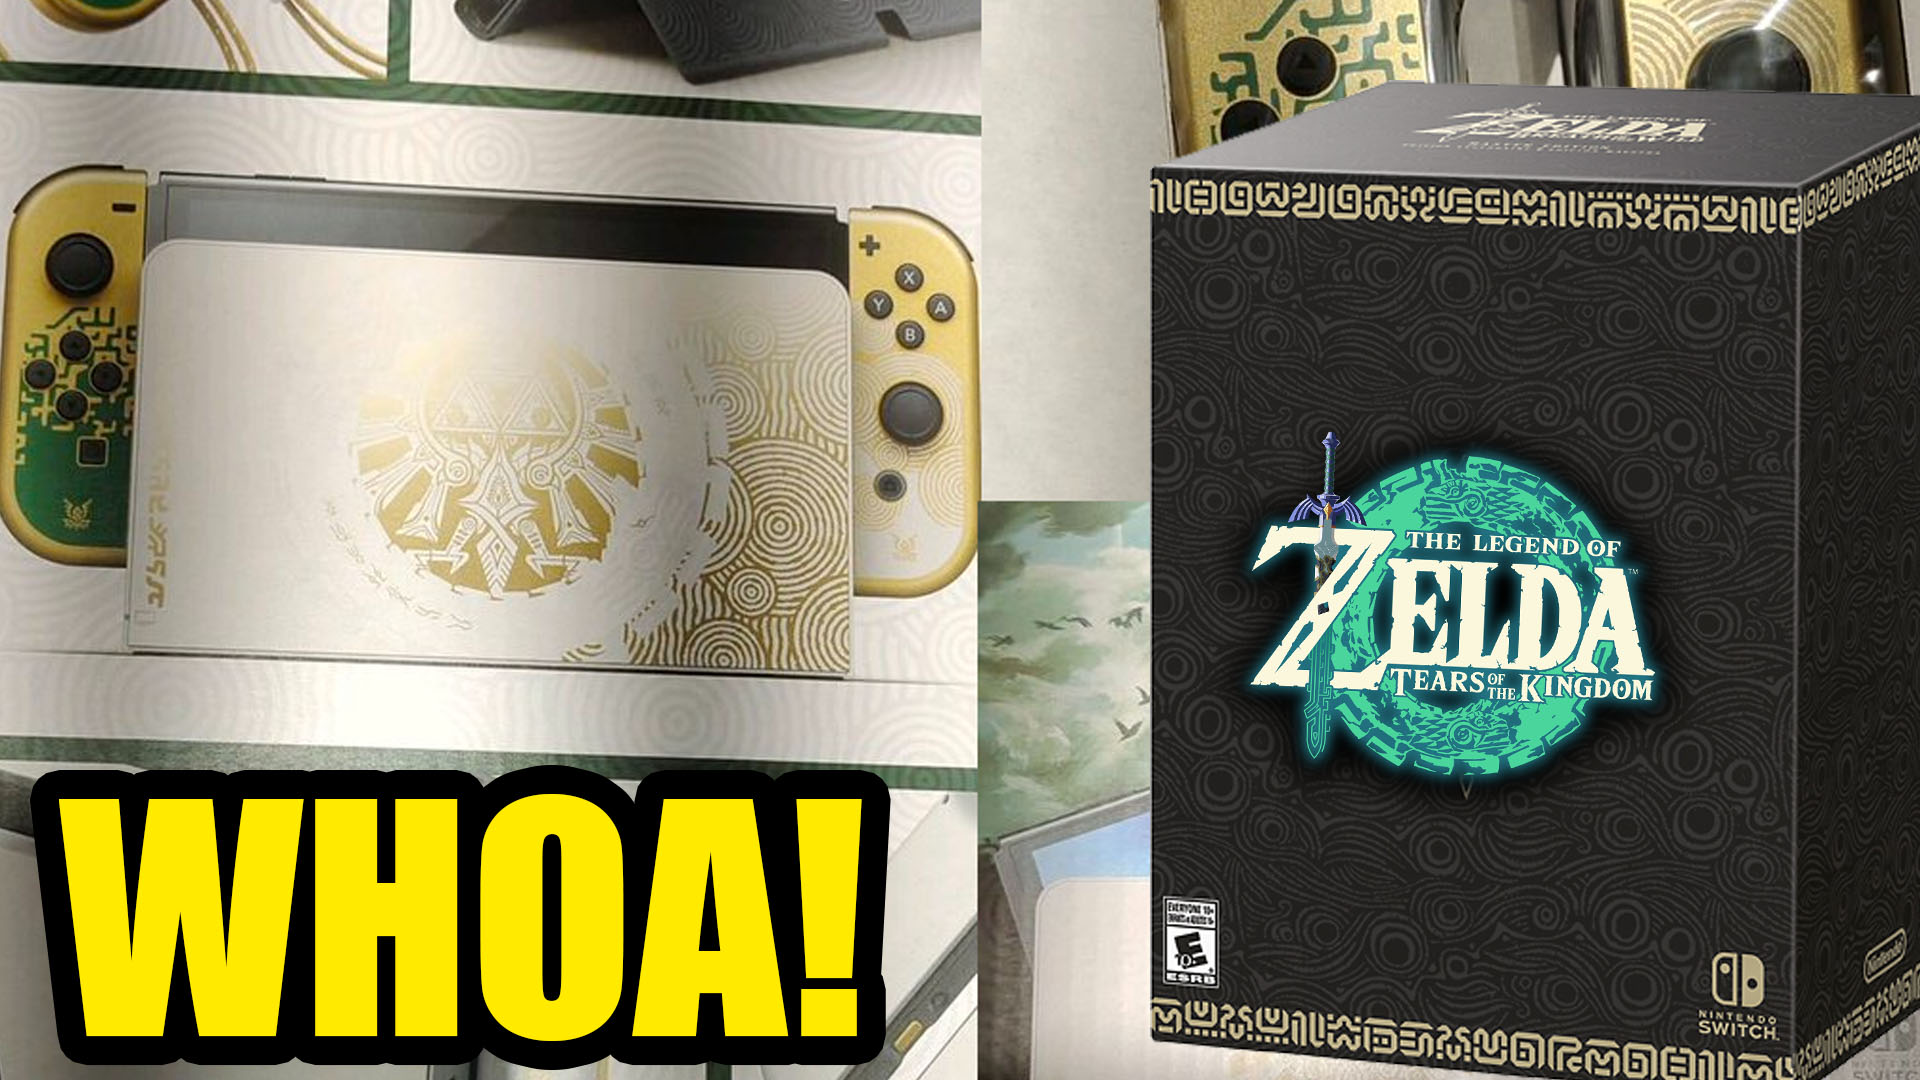 Nintendo Prime on of X Edition Date! Kingdom https://t.co/kqiyfNwZeS https://t.co/28HbYzna3E\